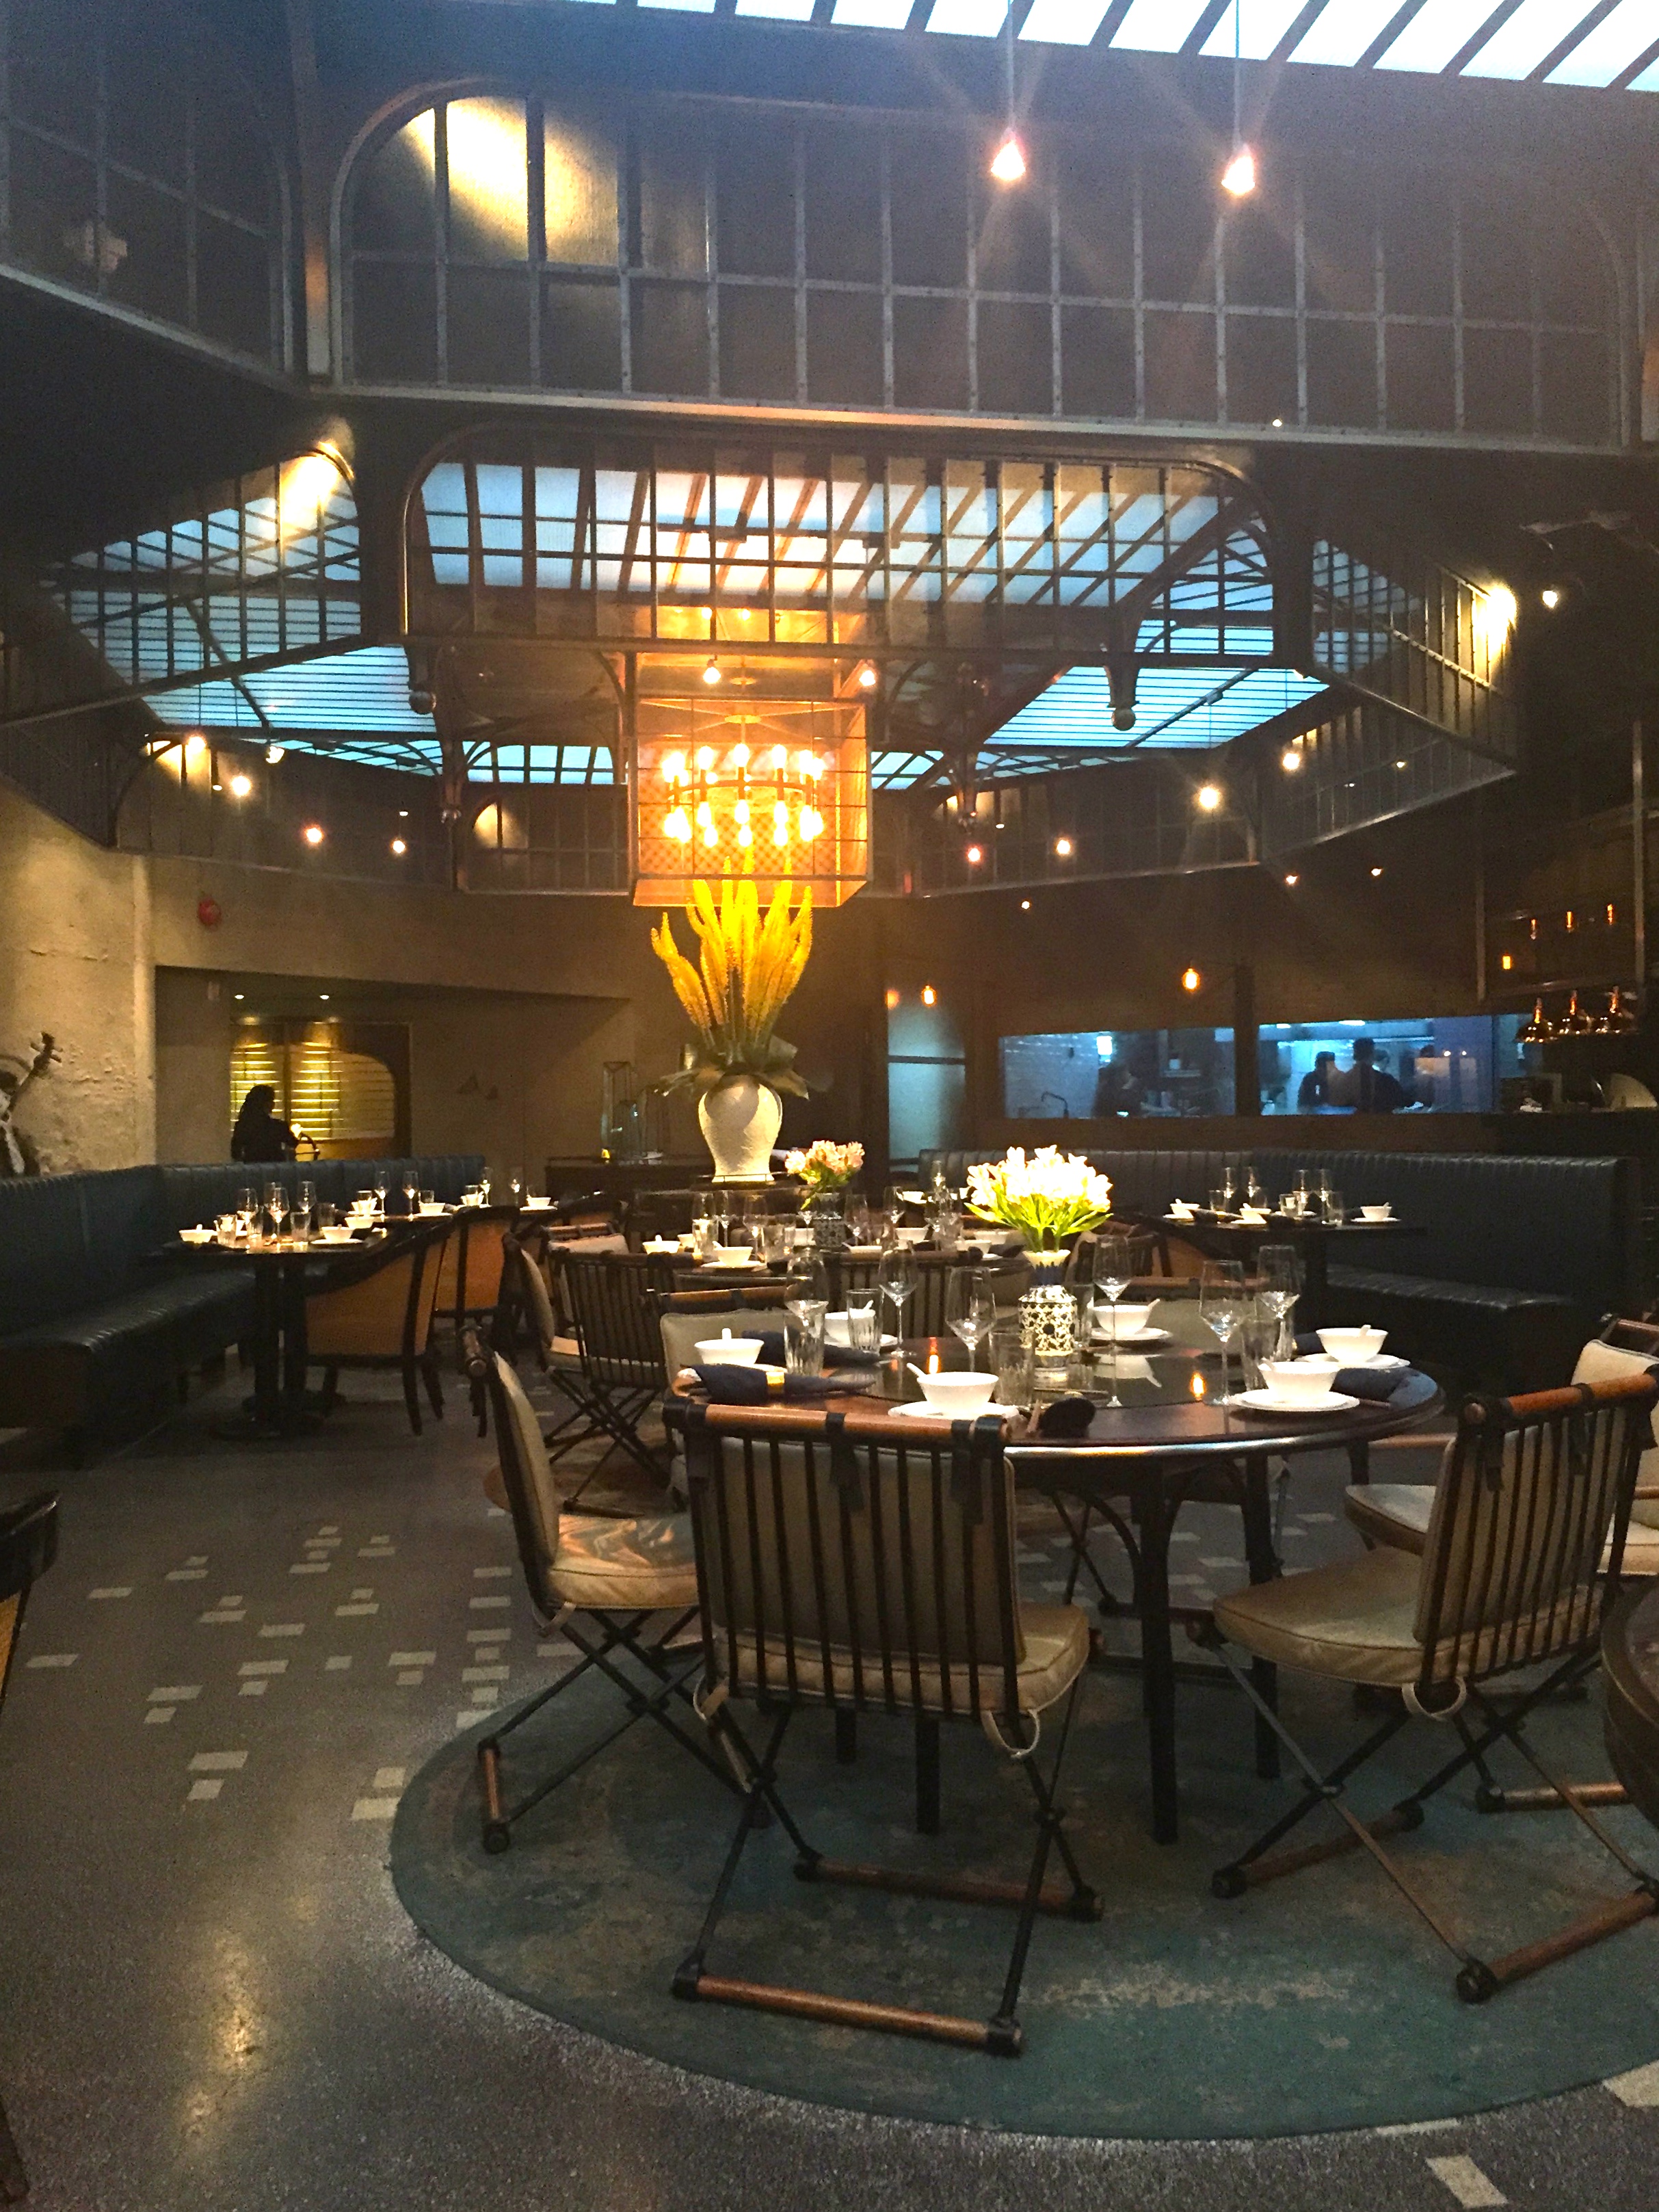 Mott 32 for Dim Sum in Hong Kong via The Potted Boxwood